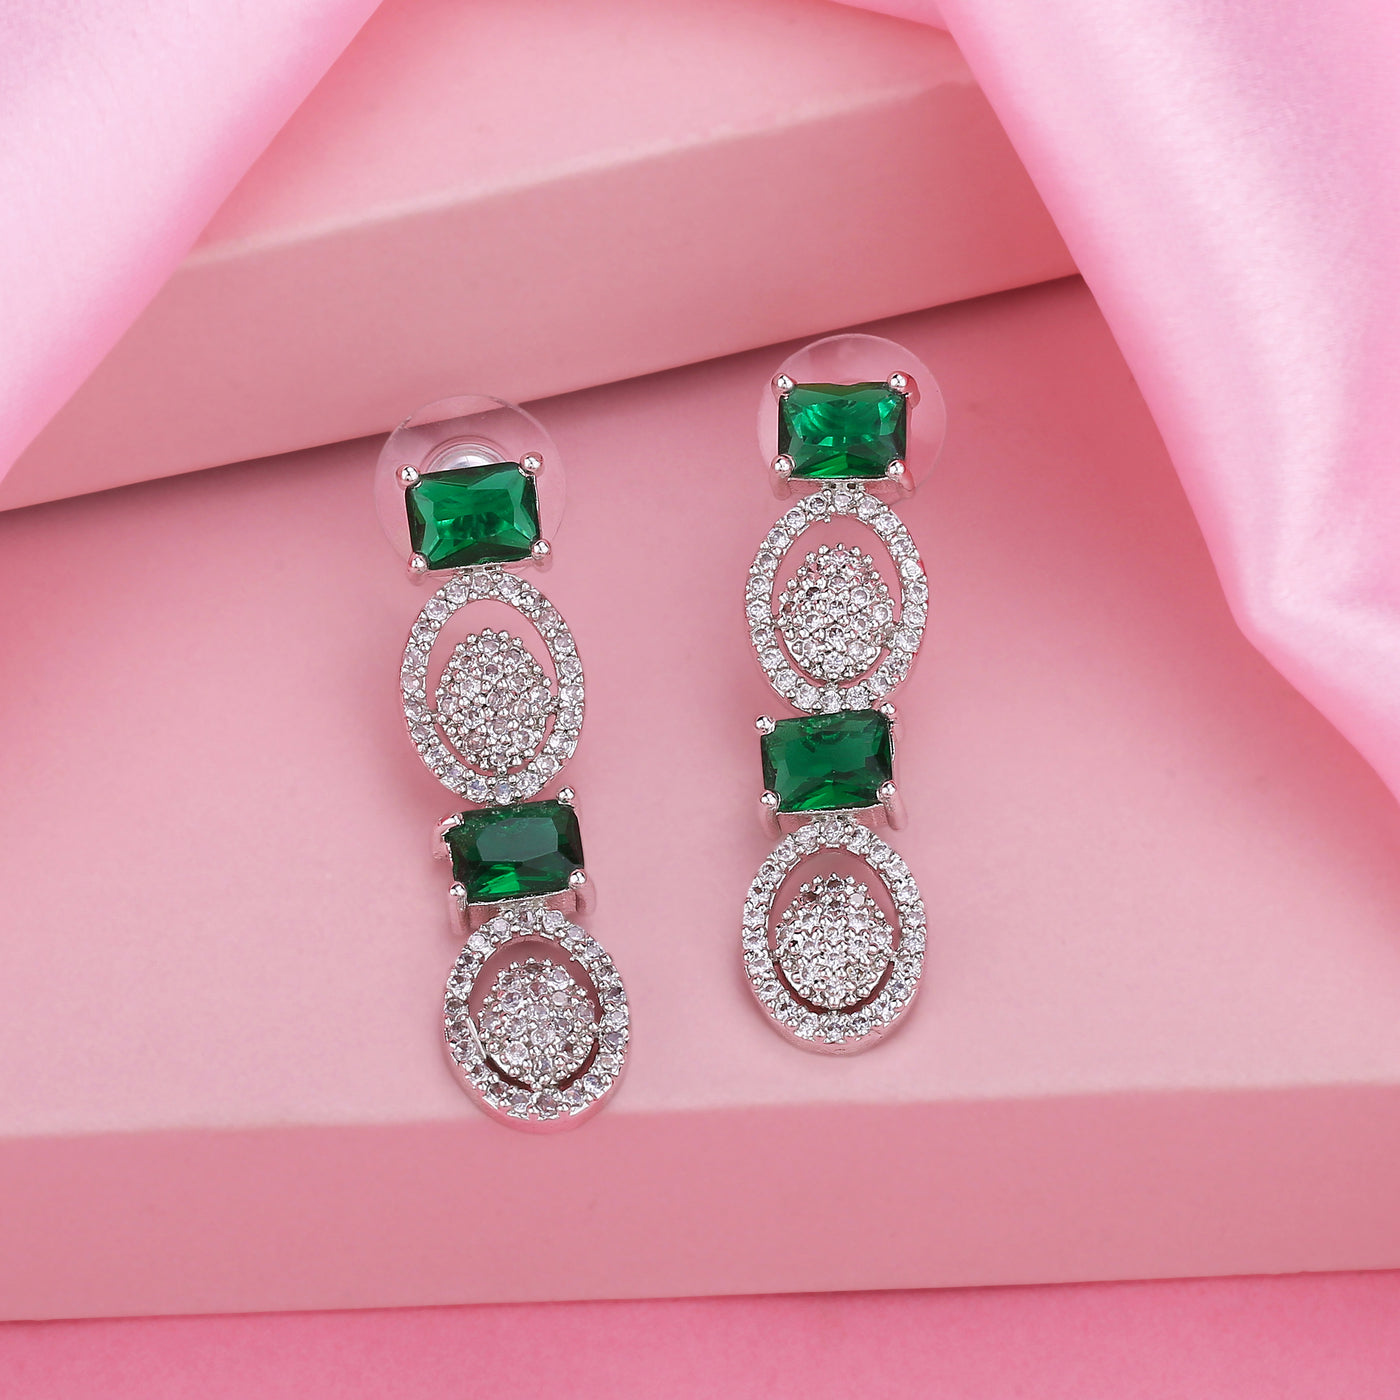 Estele Rhodium Plated CZ Adorable Earrings with Green Crystals for Women